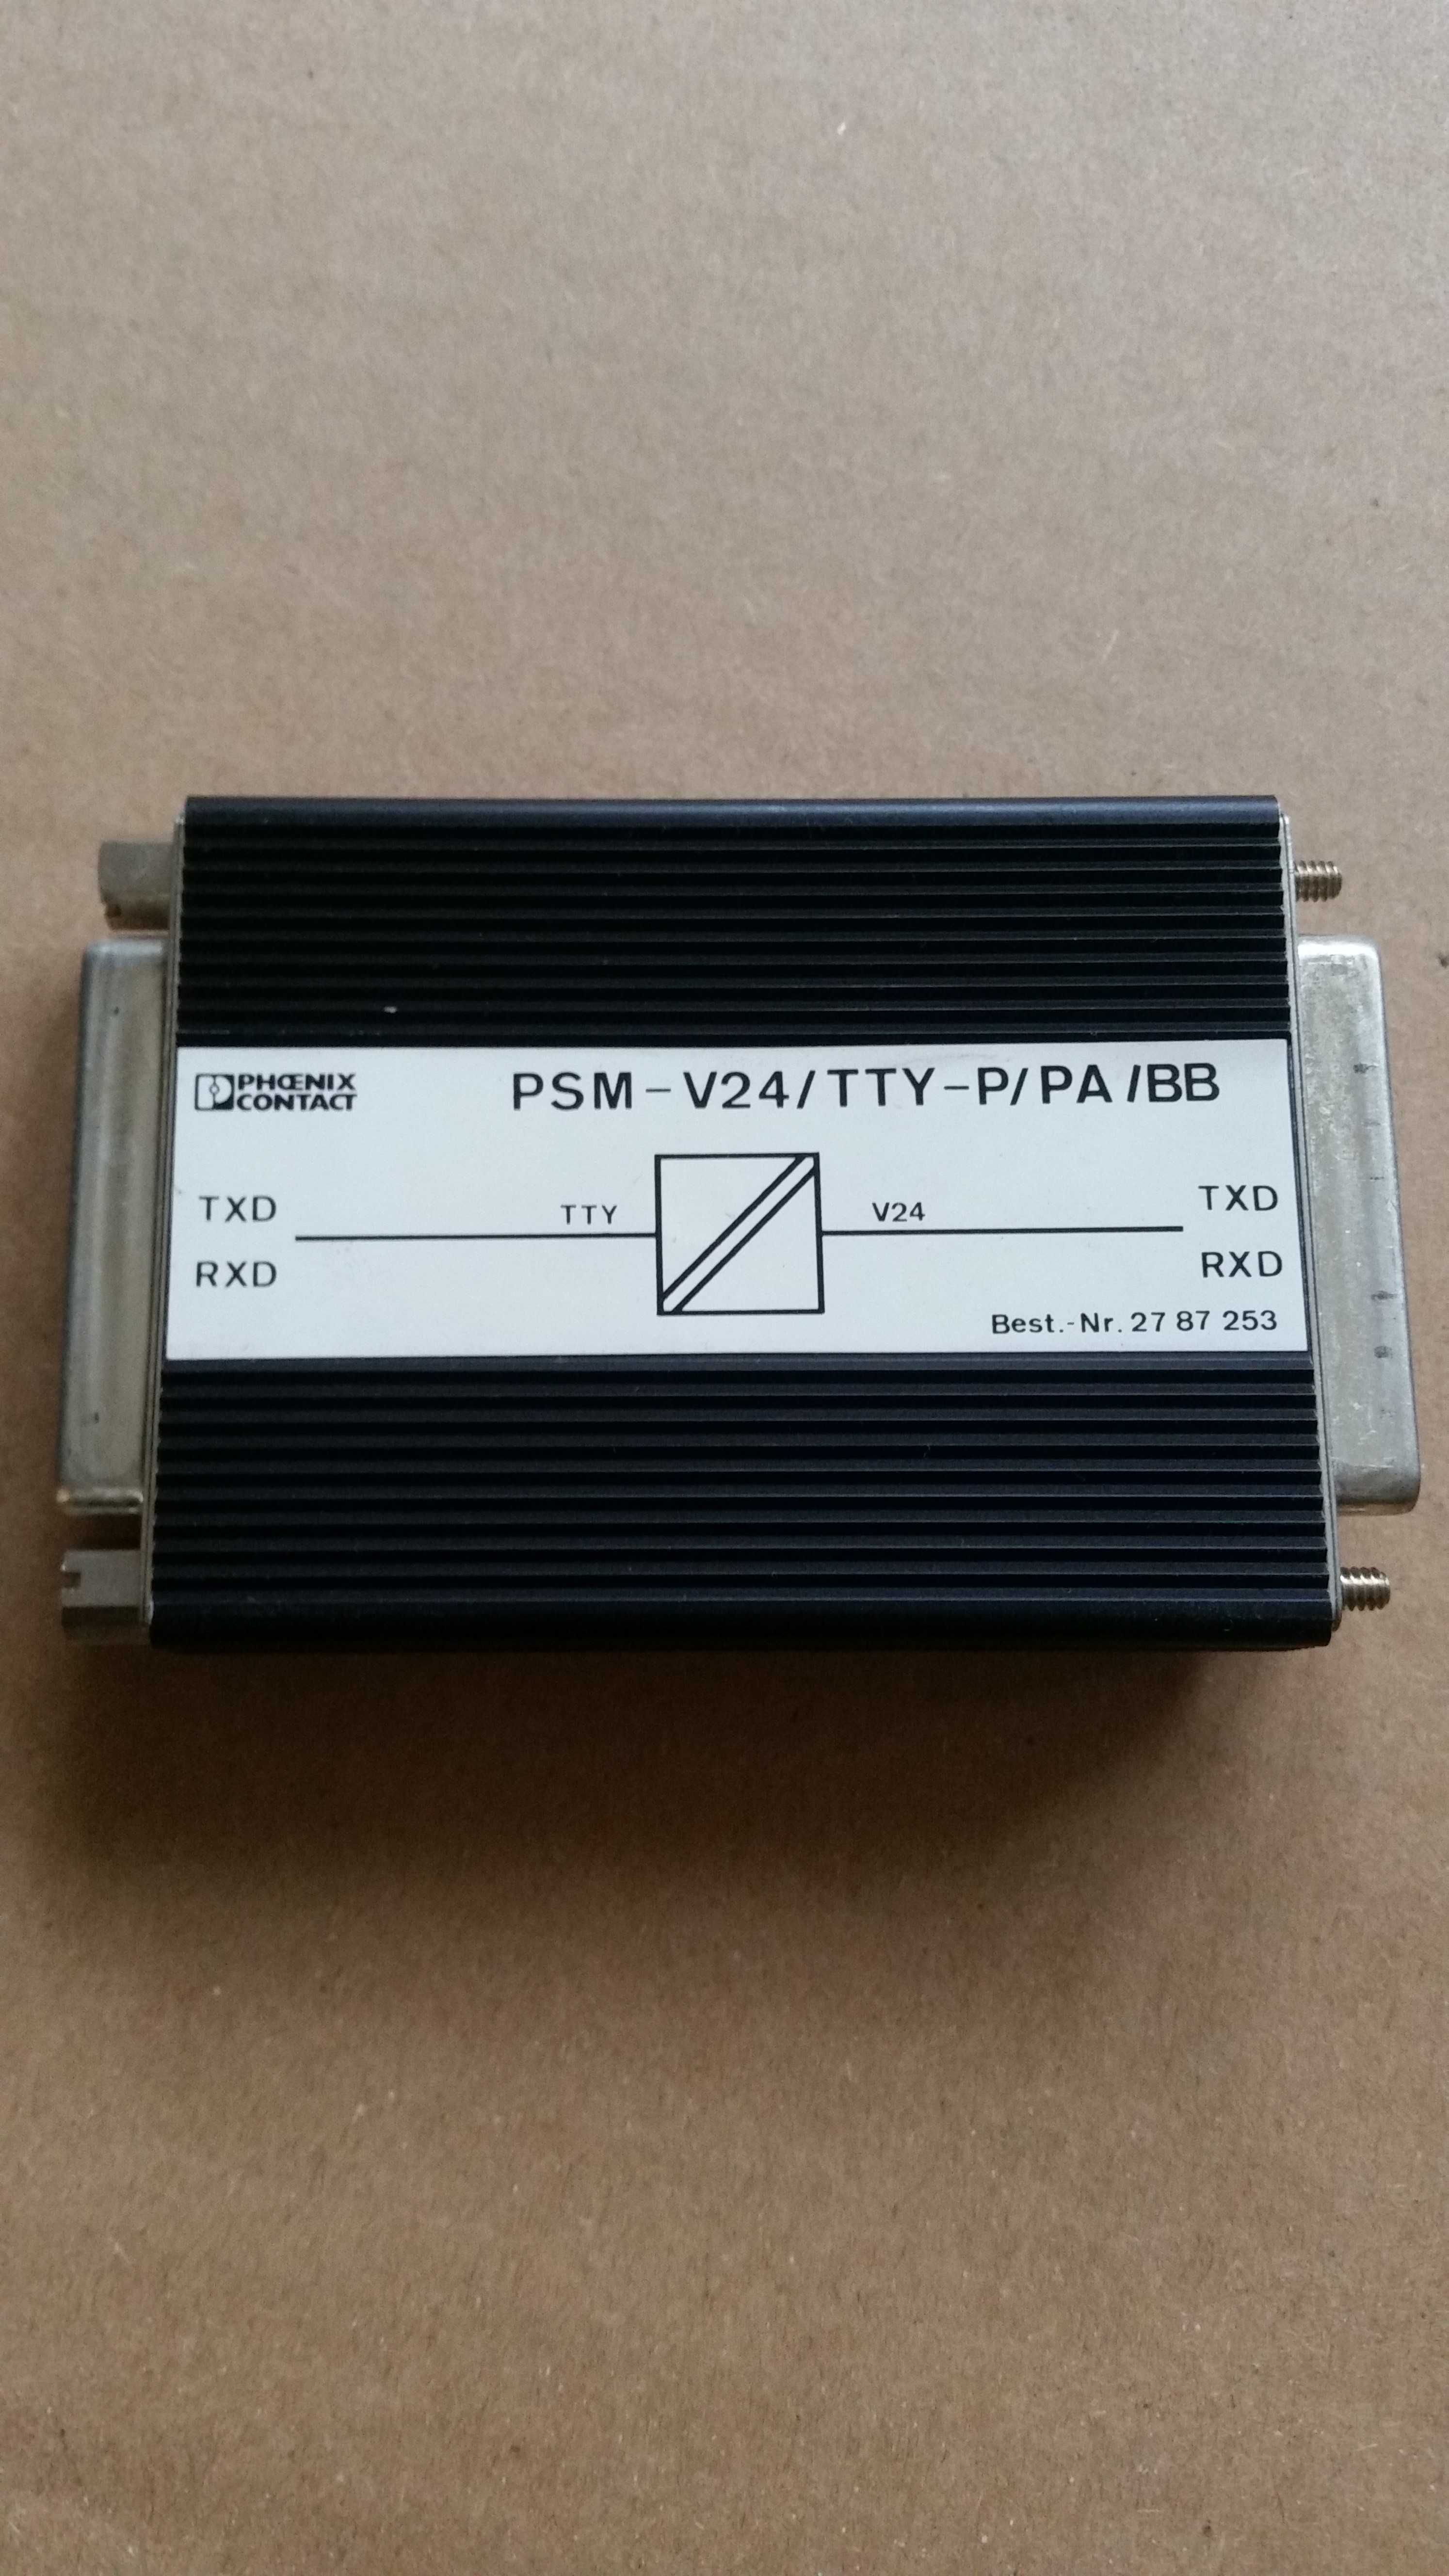 PhoenixContact PSM-V24/TTY-P/PA/BB TTY RS232